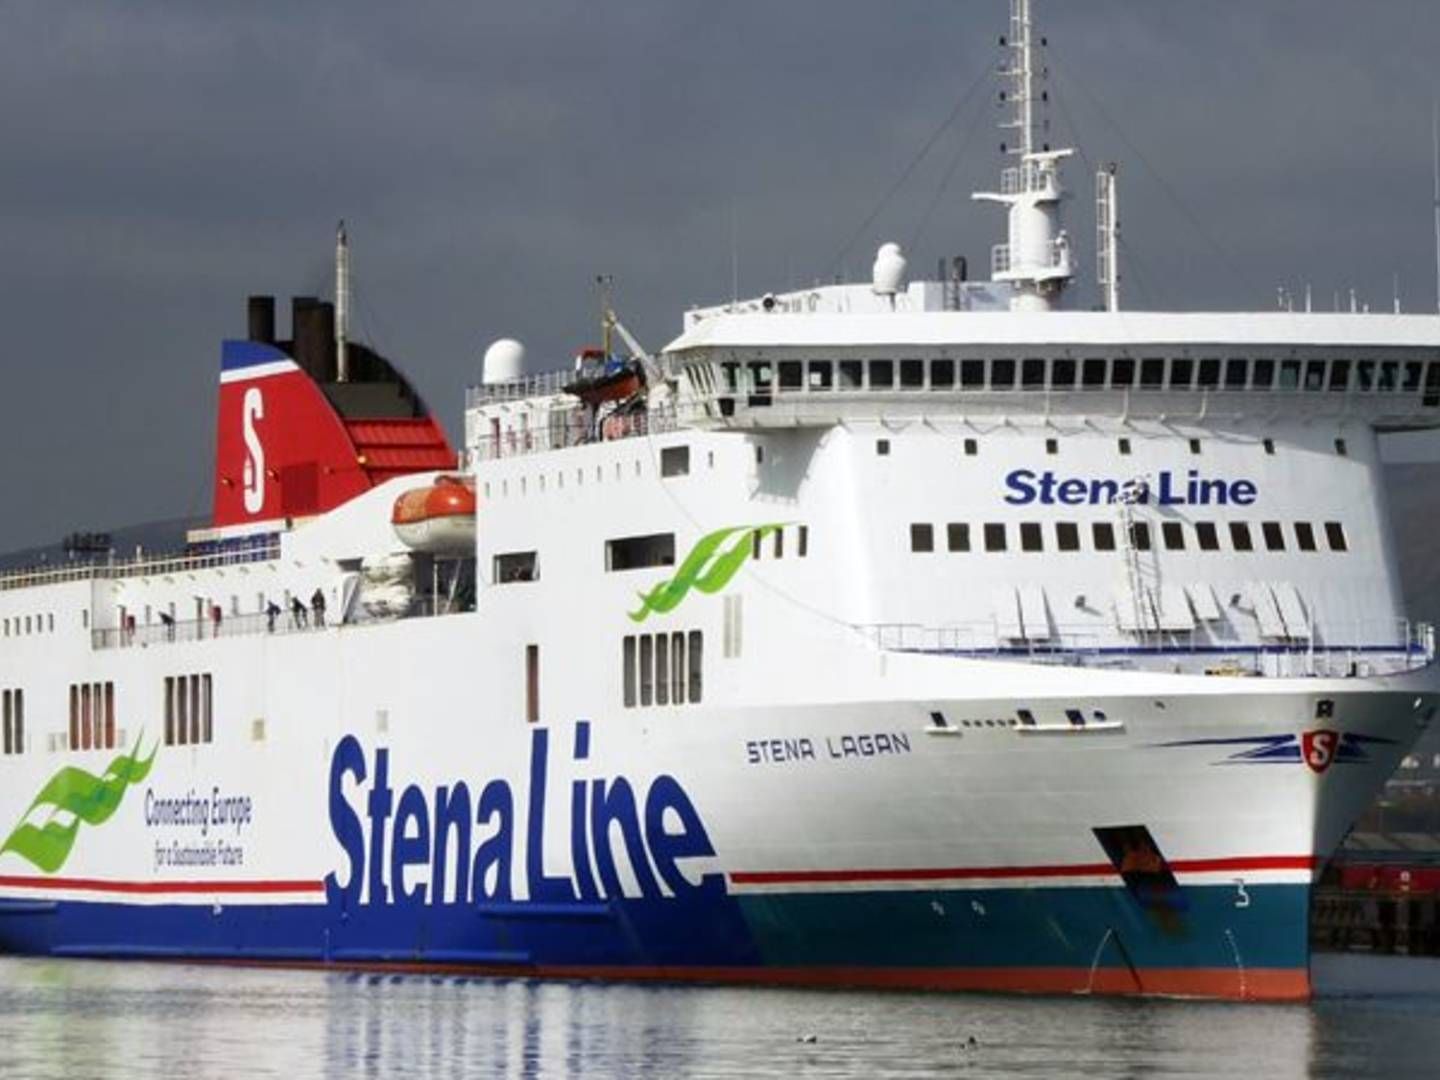 Stena Lagan (pictured) and Stena Mersey will be deployed in the Baltic Sea next year. Both ferries will be expanded and modernized prior to this. | Photo: PR / Stena Line